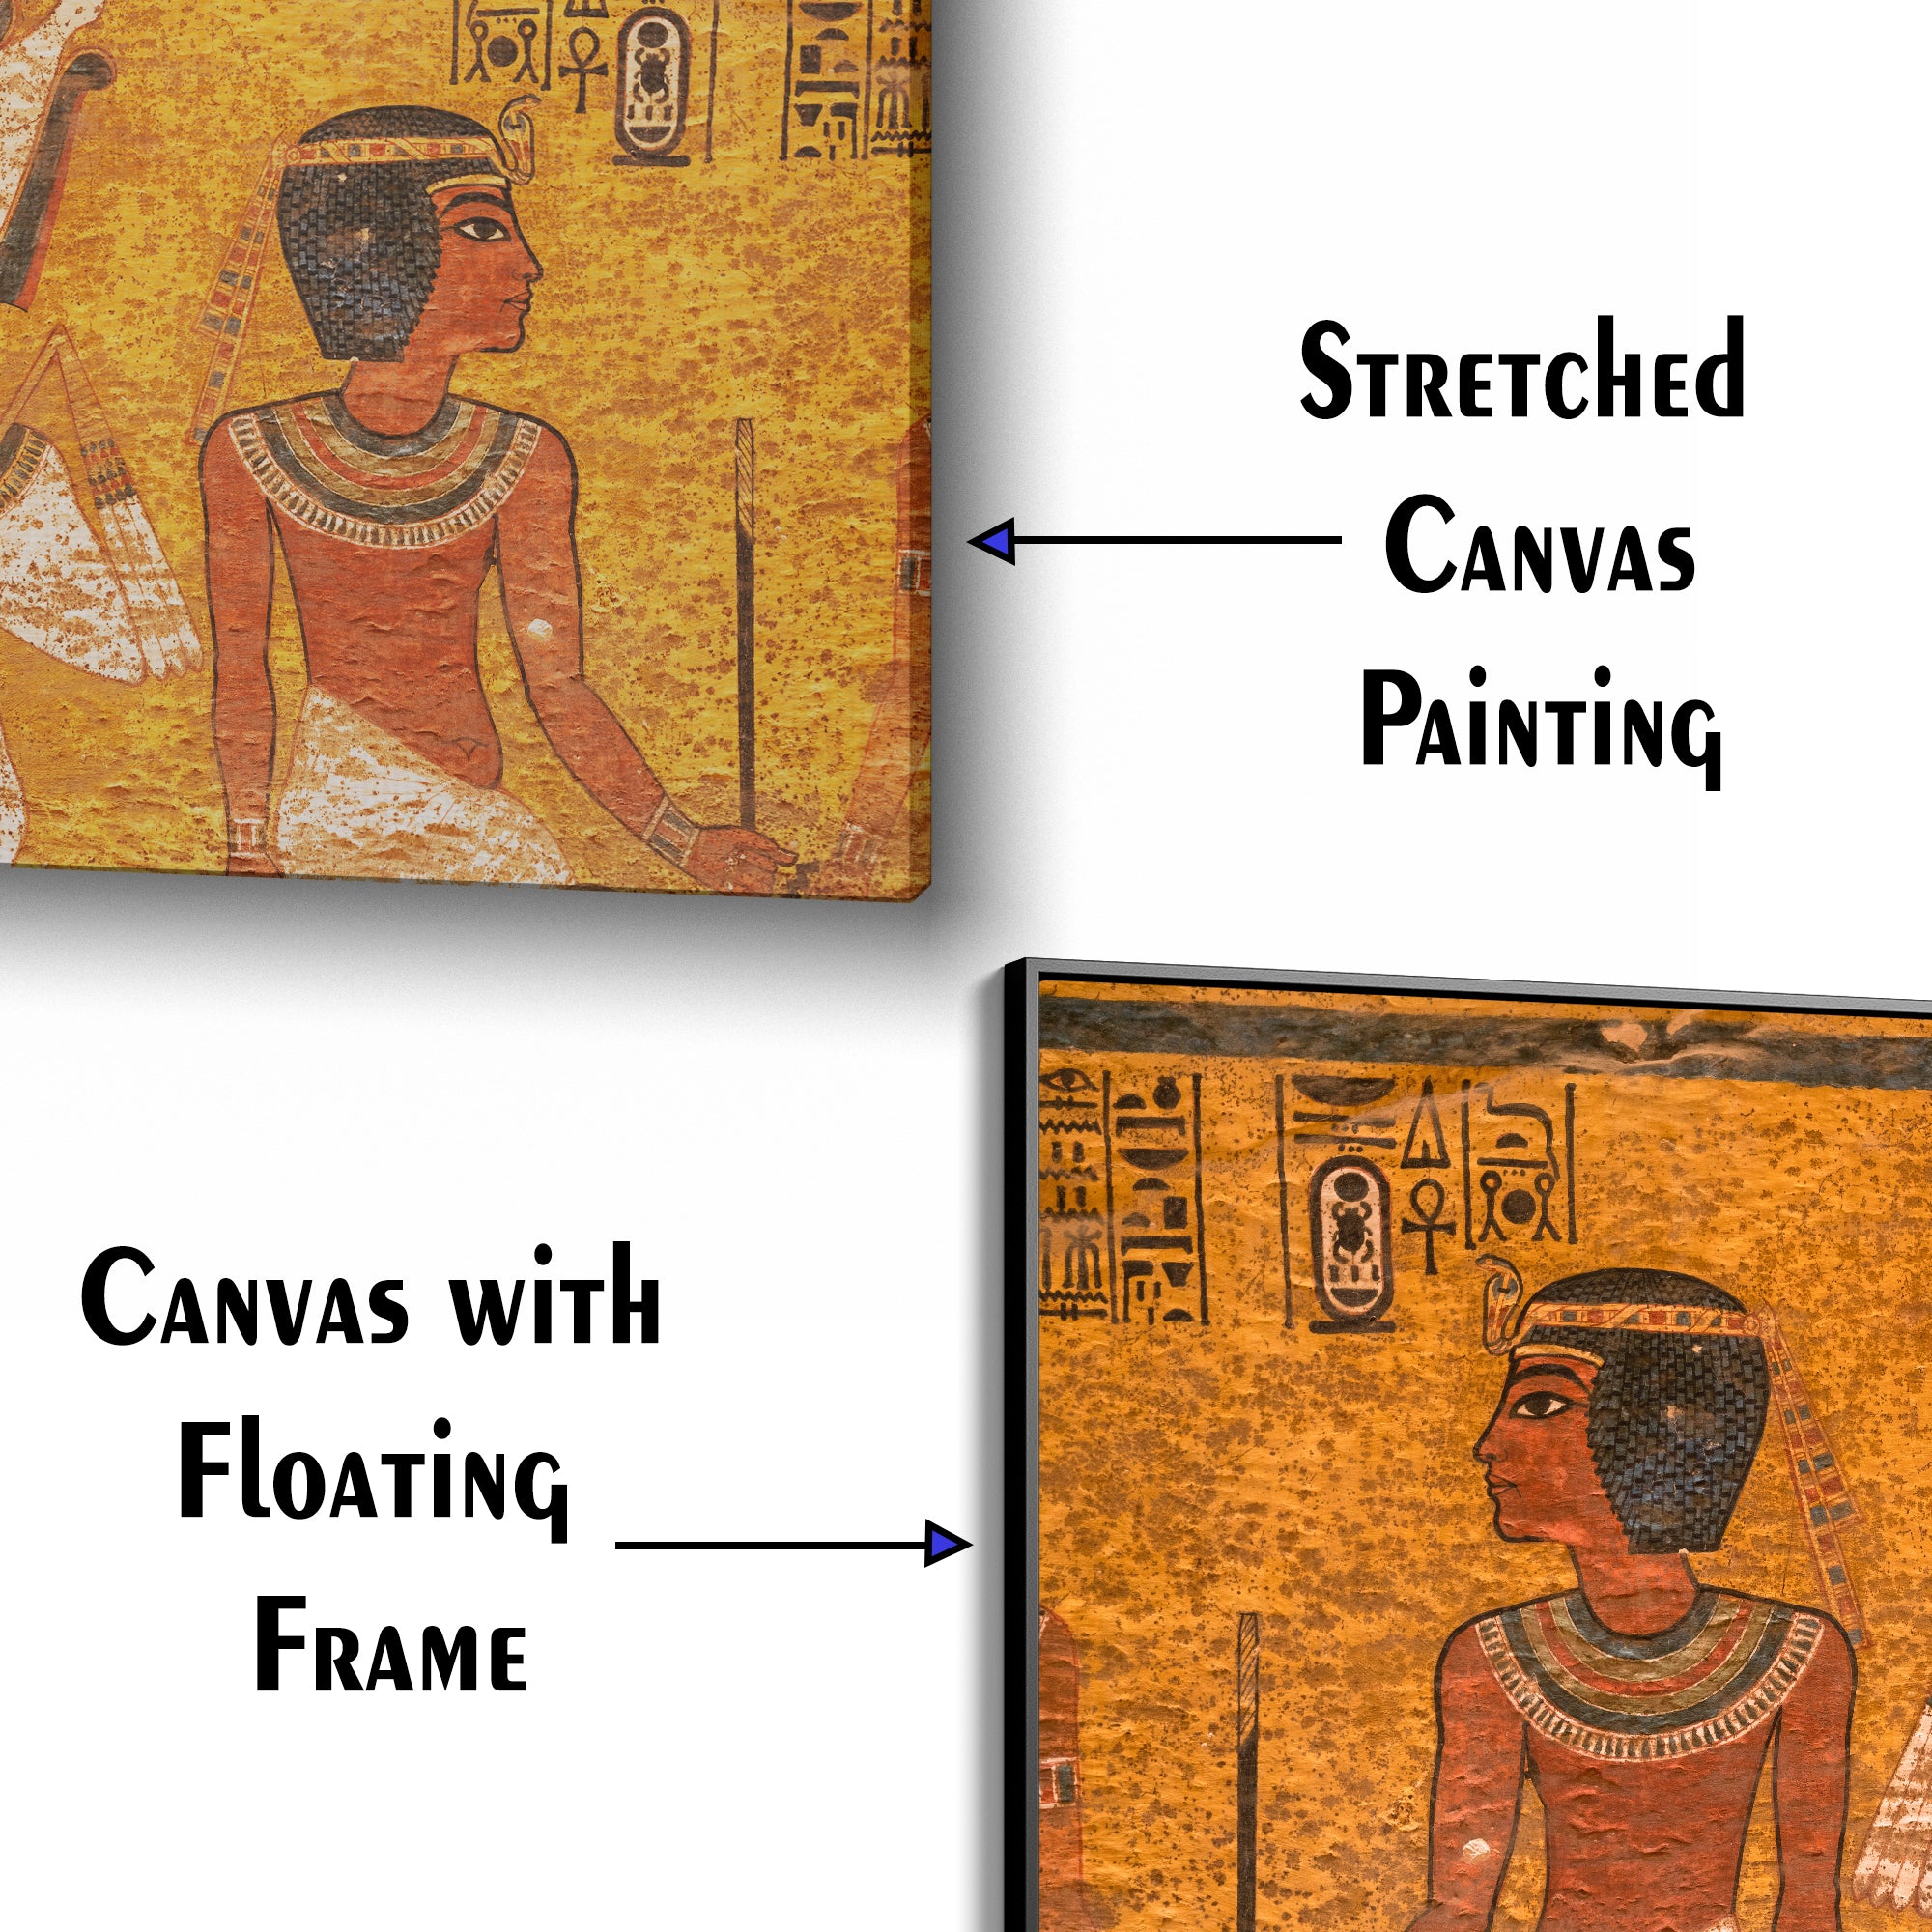 Egyptian Art Canvas Wall Painting